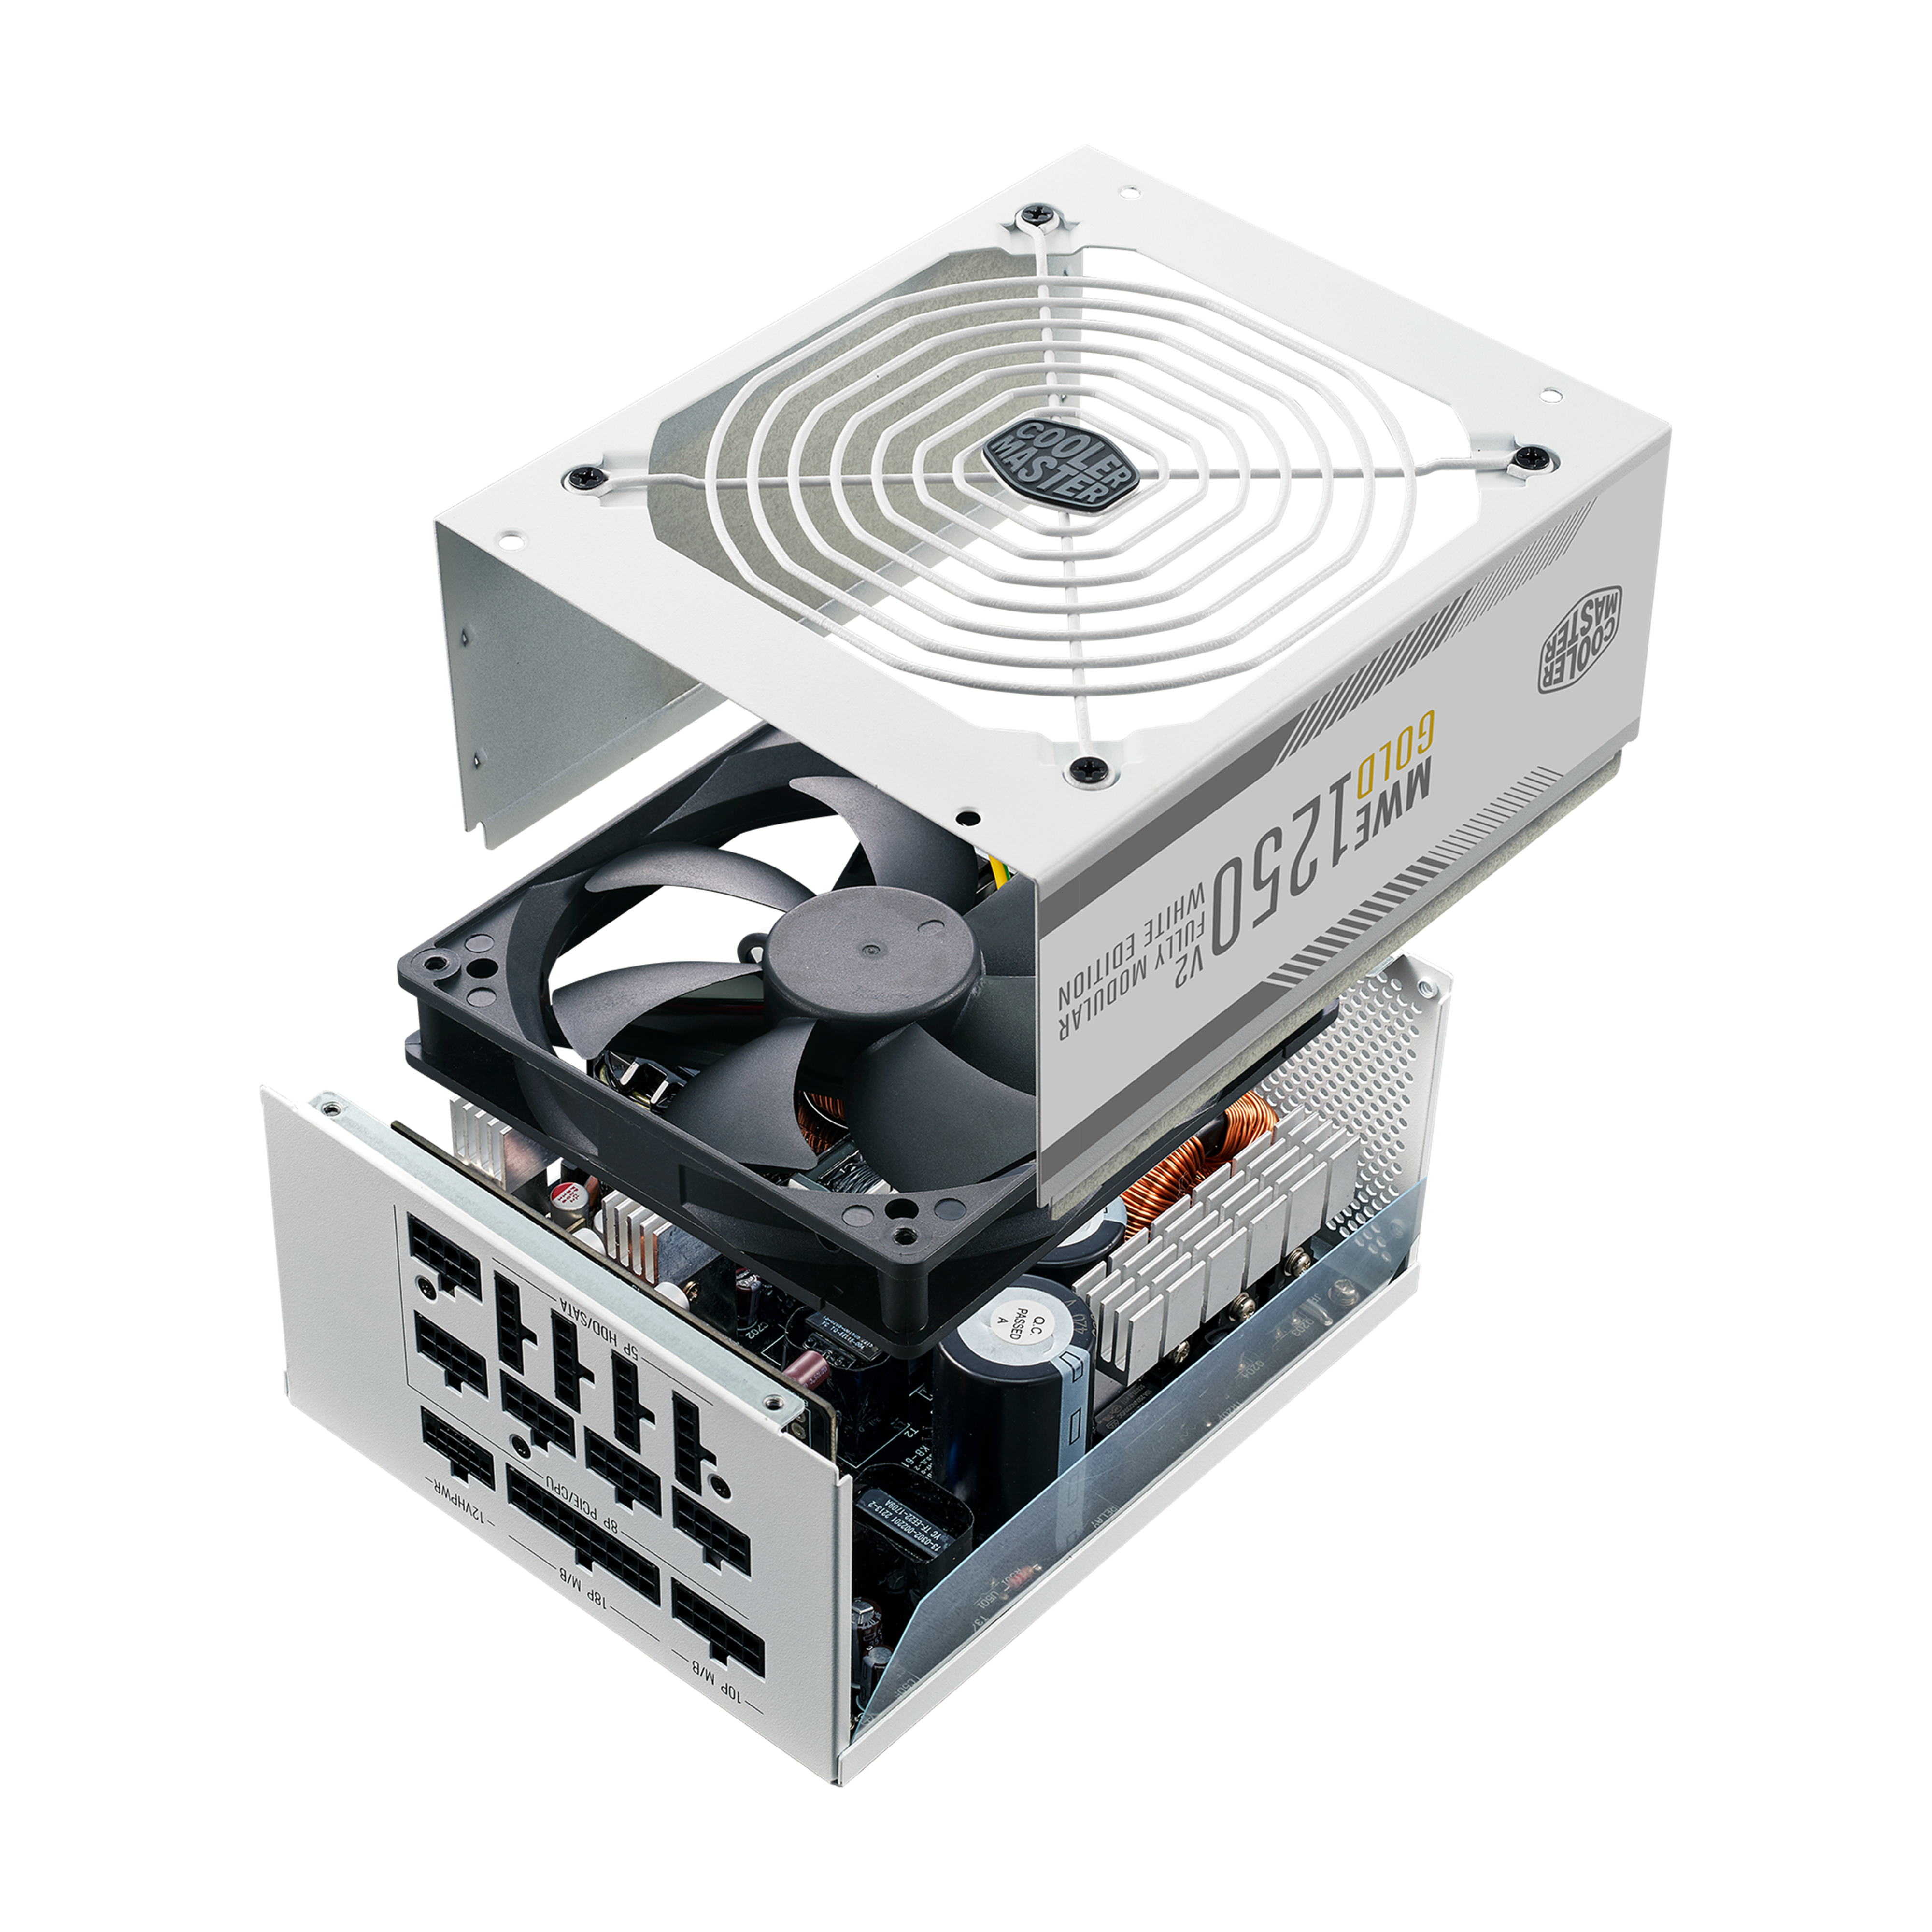 Buy the Cooler Master MWE Gold V2 ATX 3.0 1250W Power Supply 80